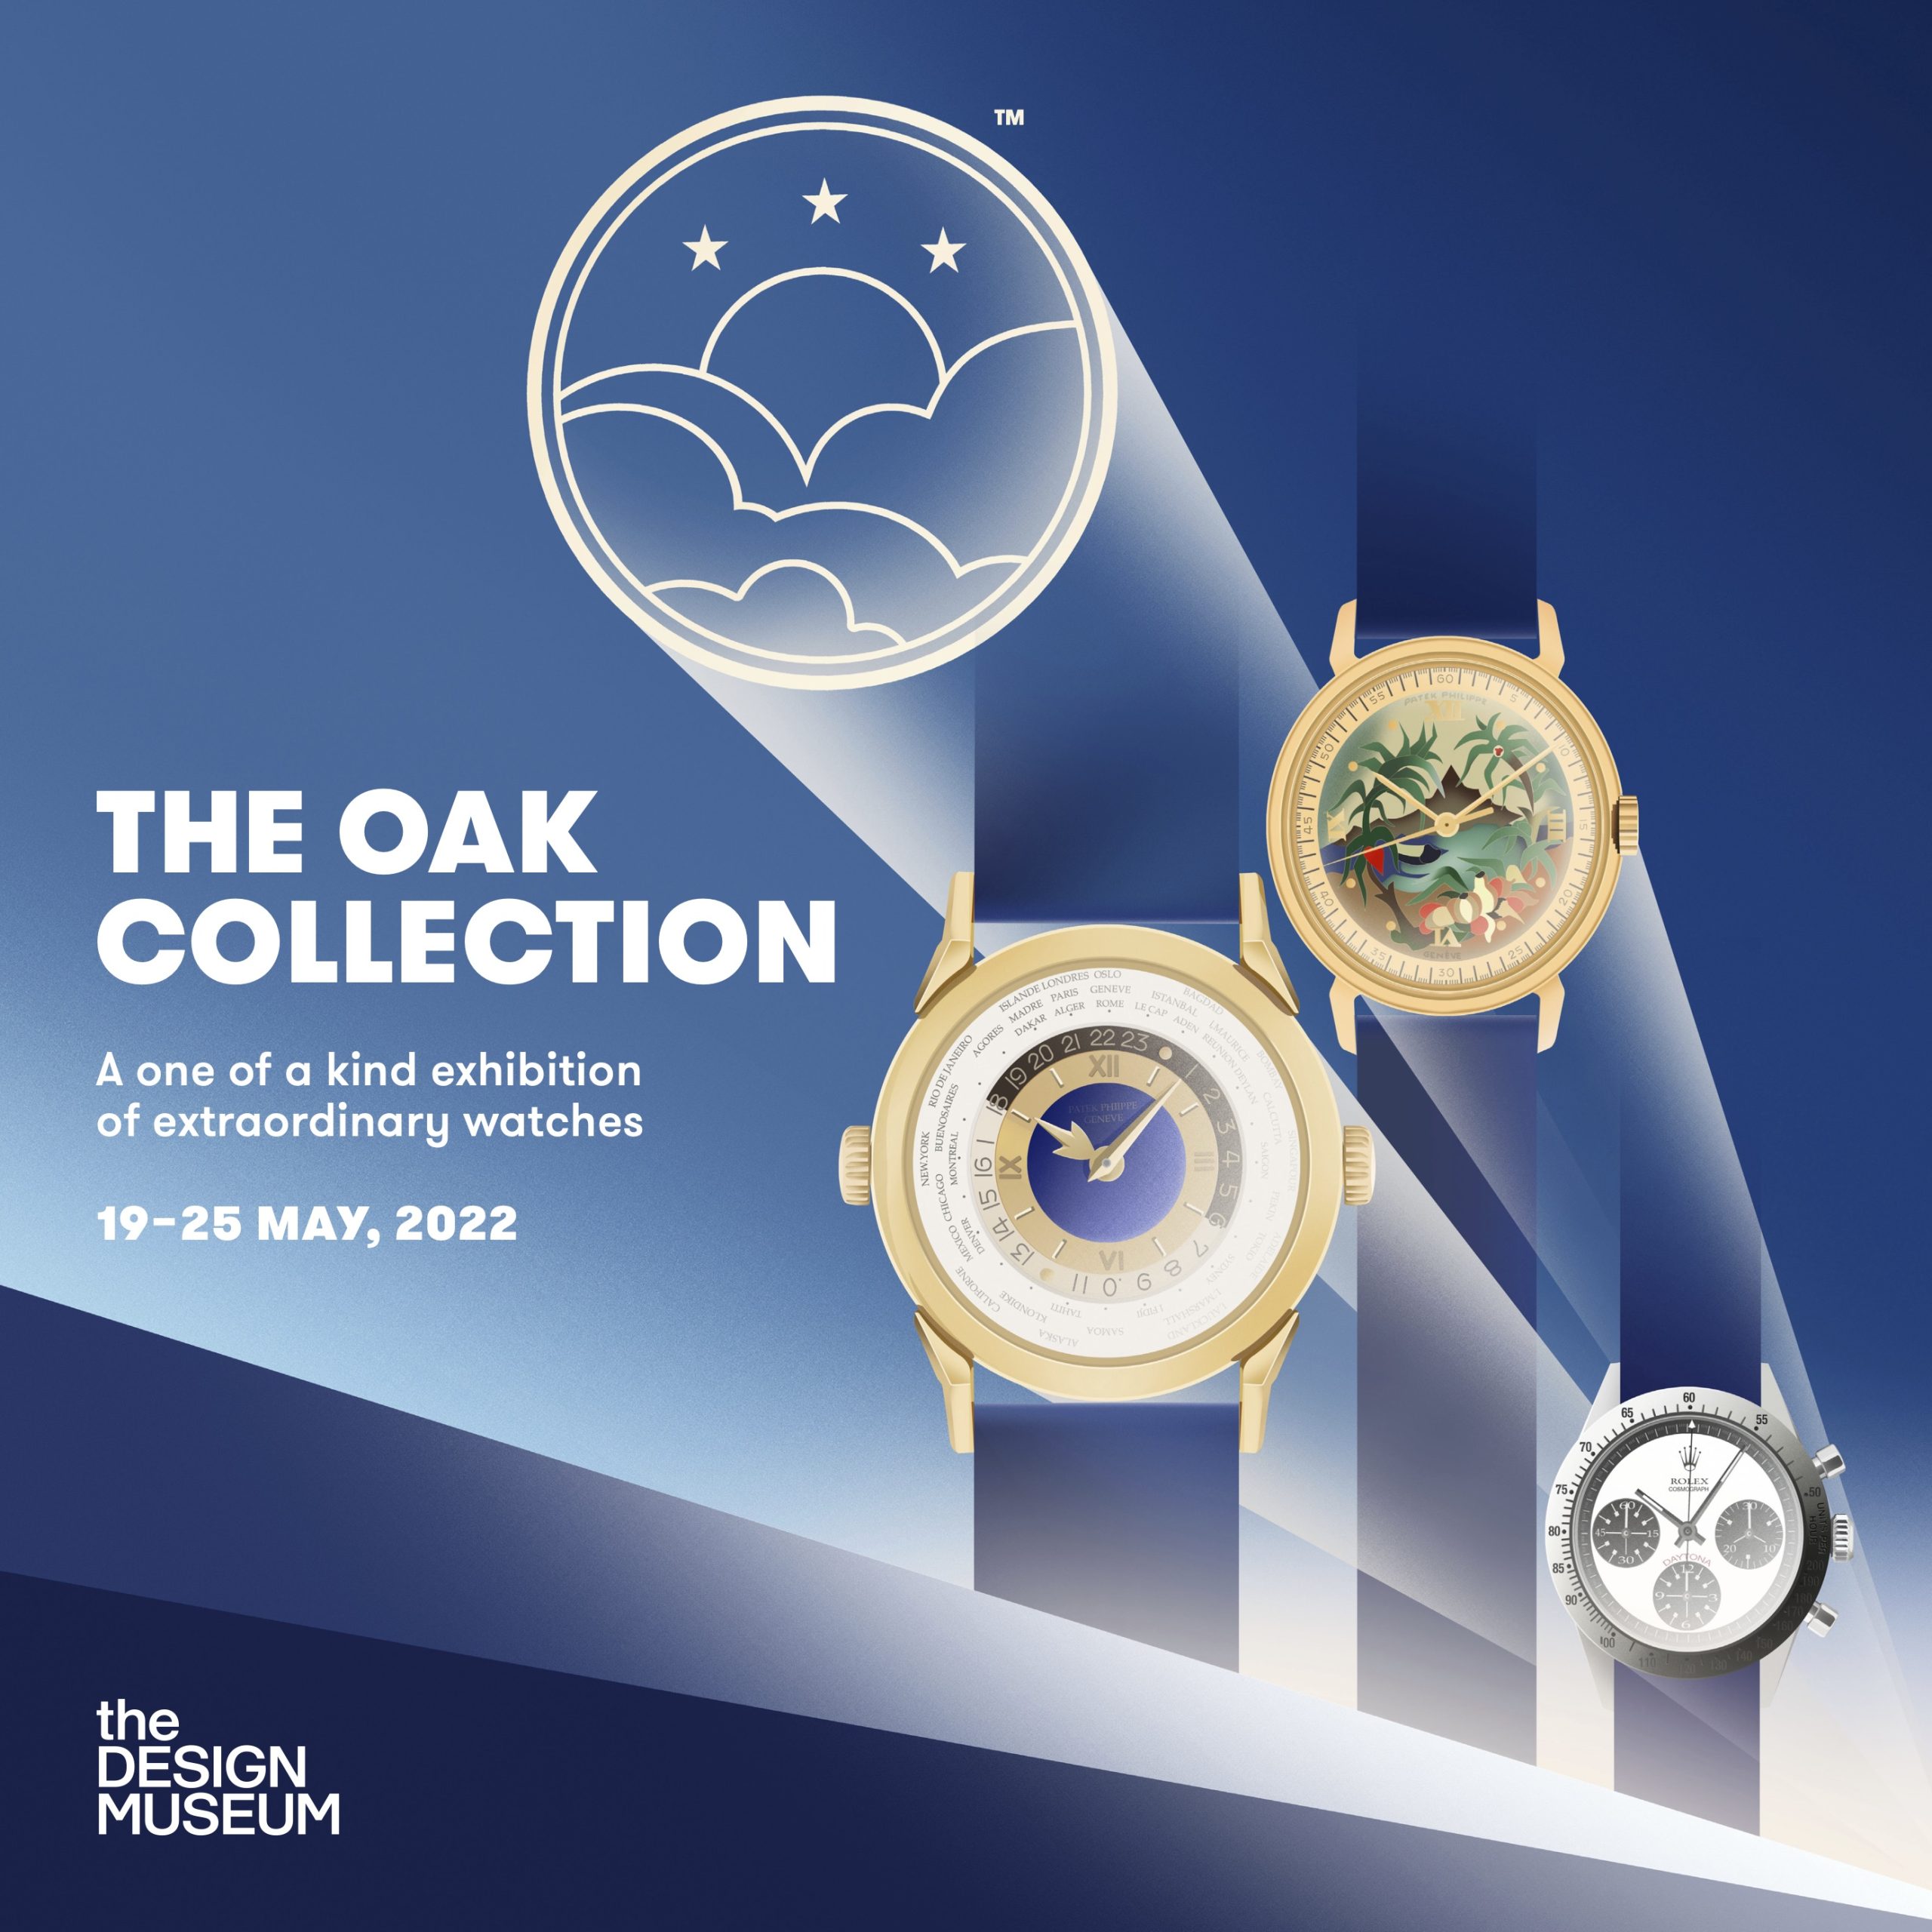 The Oak Collection of rare and one-of-a-kind watches from a private collector makes its debut next week at the Design Museum, London. 